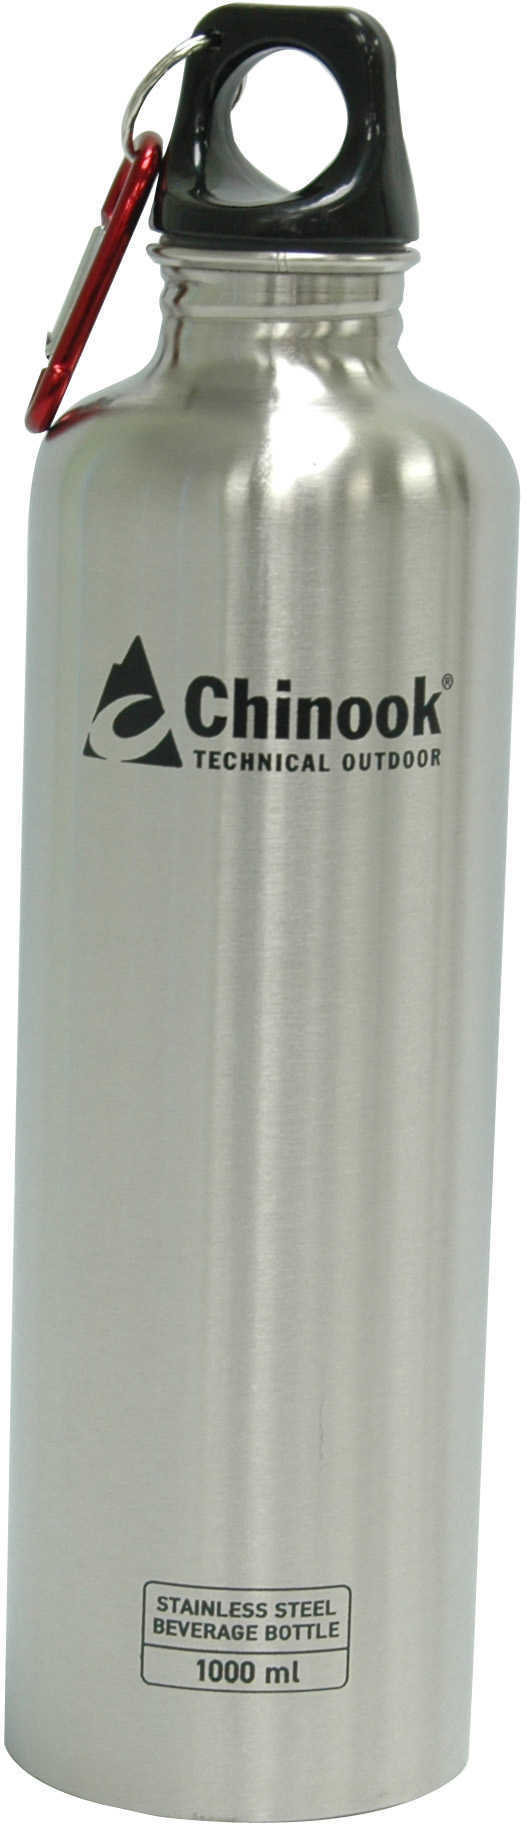 Chinook Cascade Wide Mouth Stainless Steel Bottle 32 oz., Natural 41135